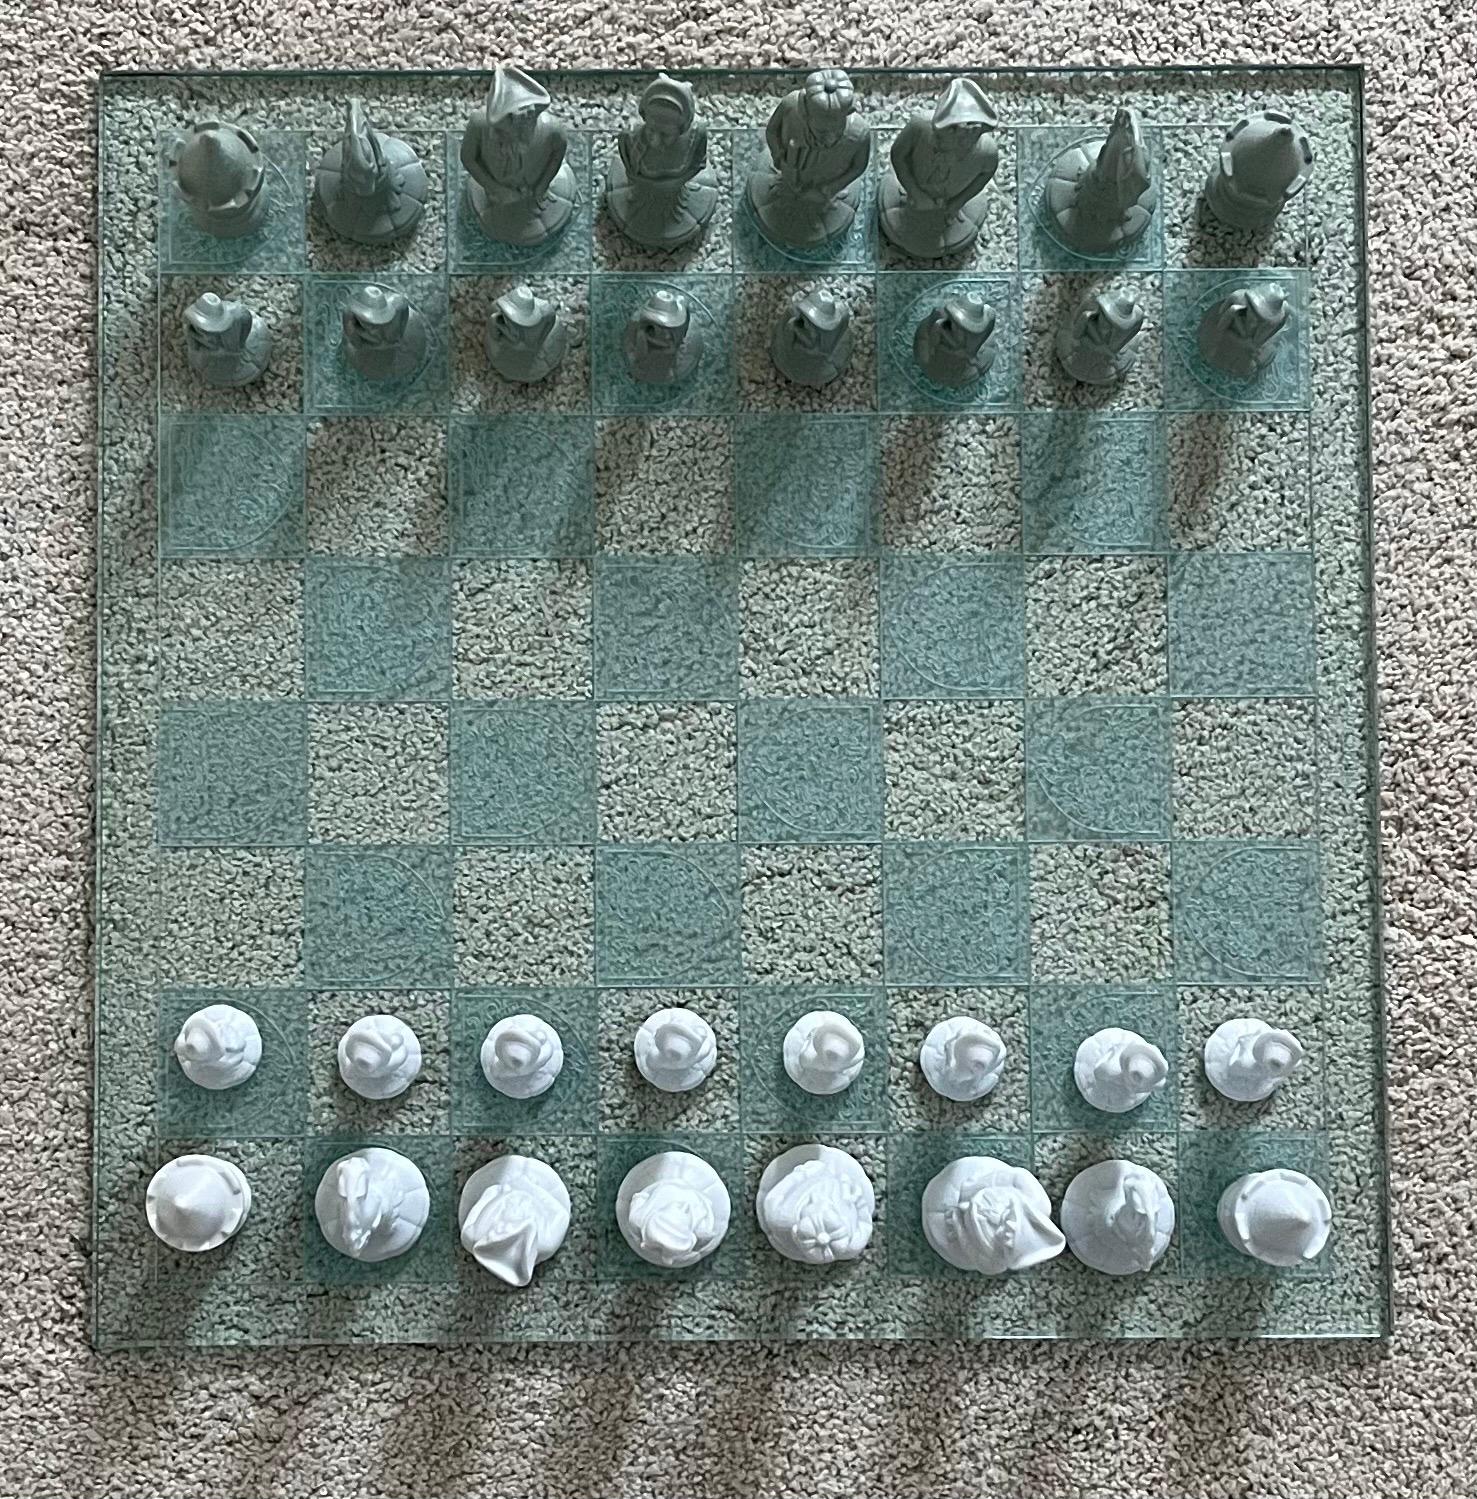 German Vintage Bisque Porcelain Chess Set with Etched Glass Board by Furstenberg  For Sale